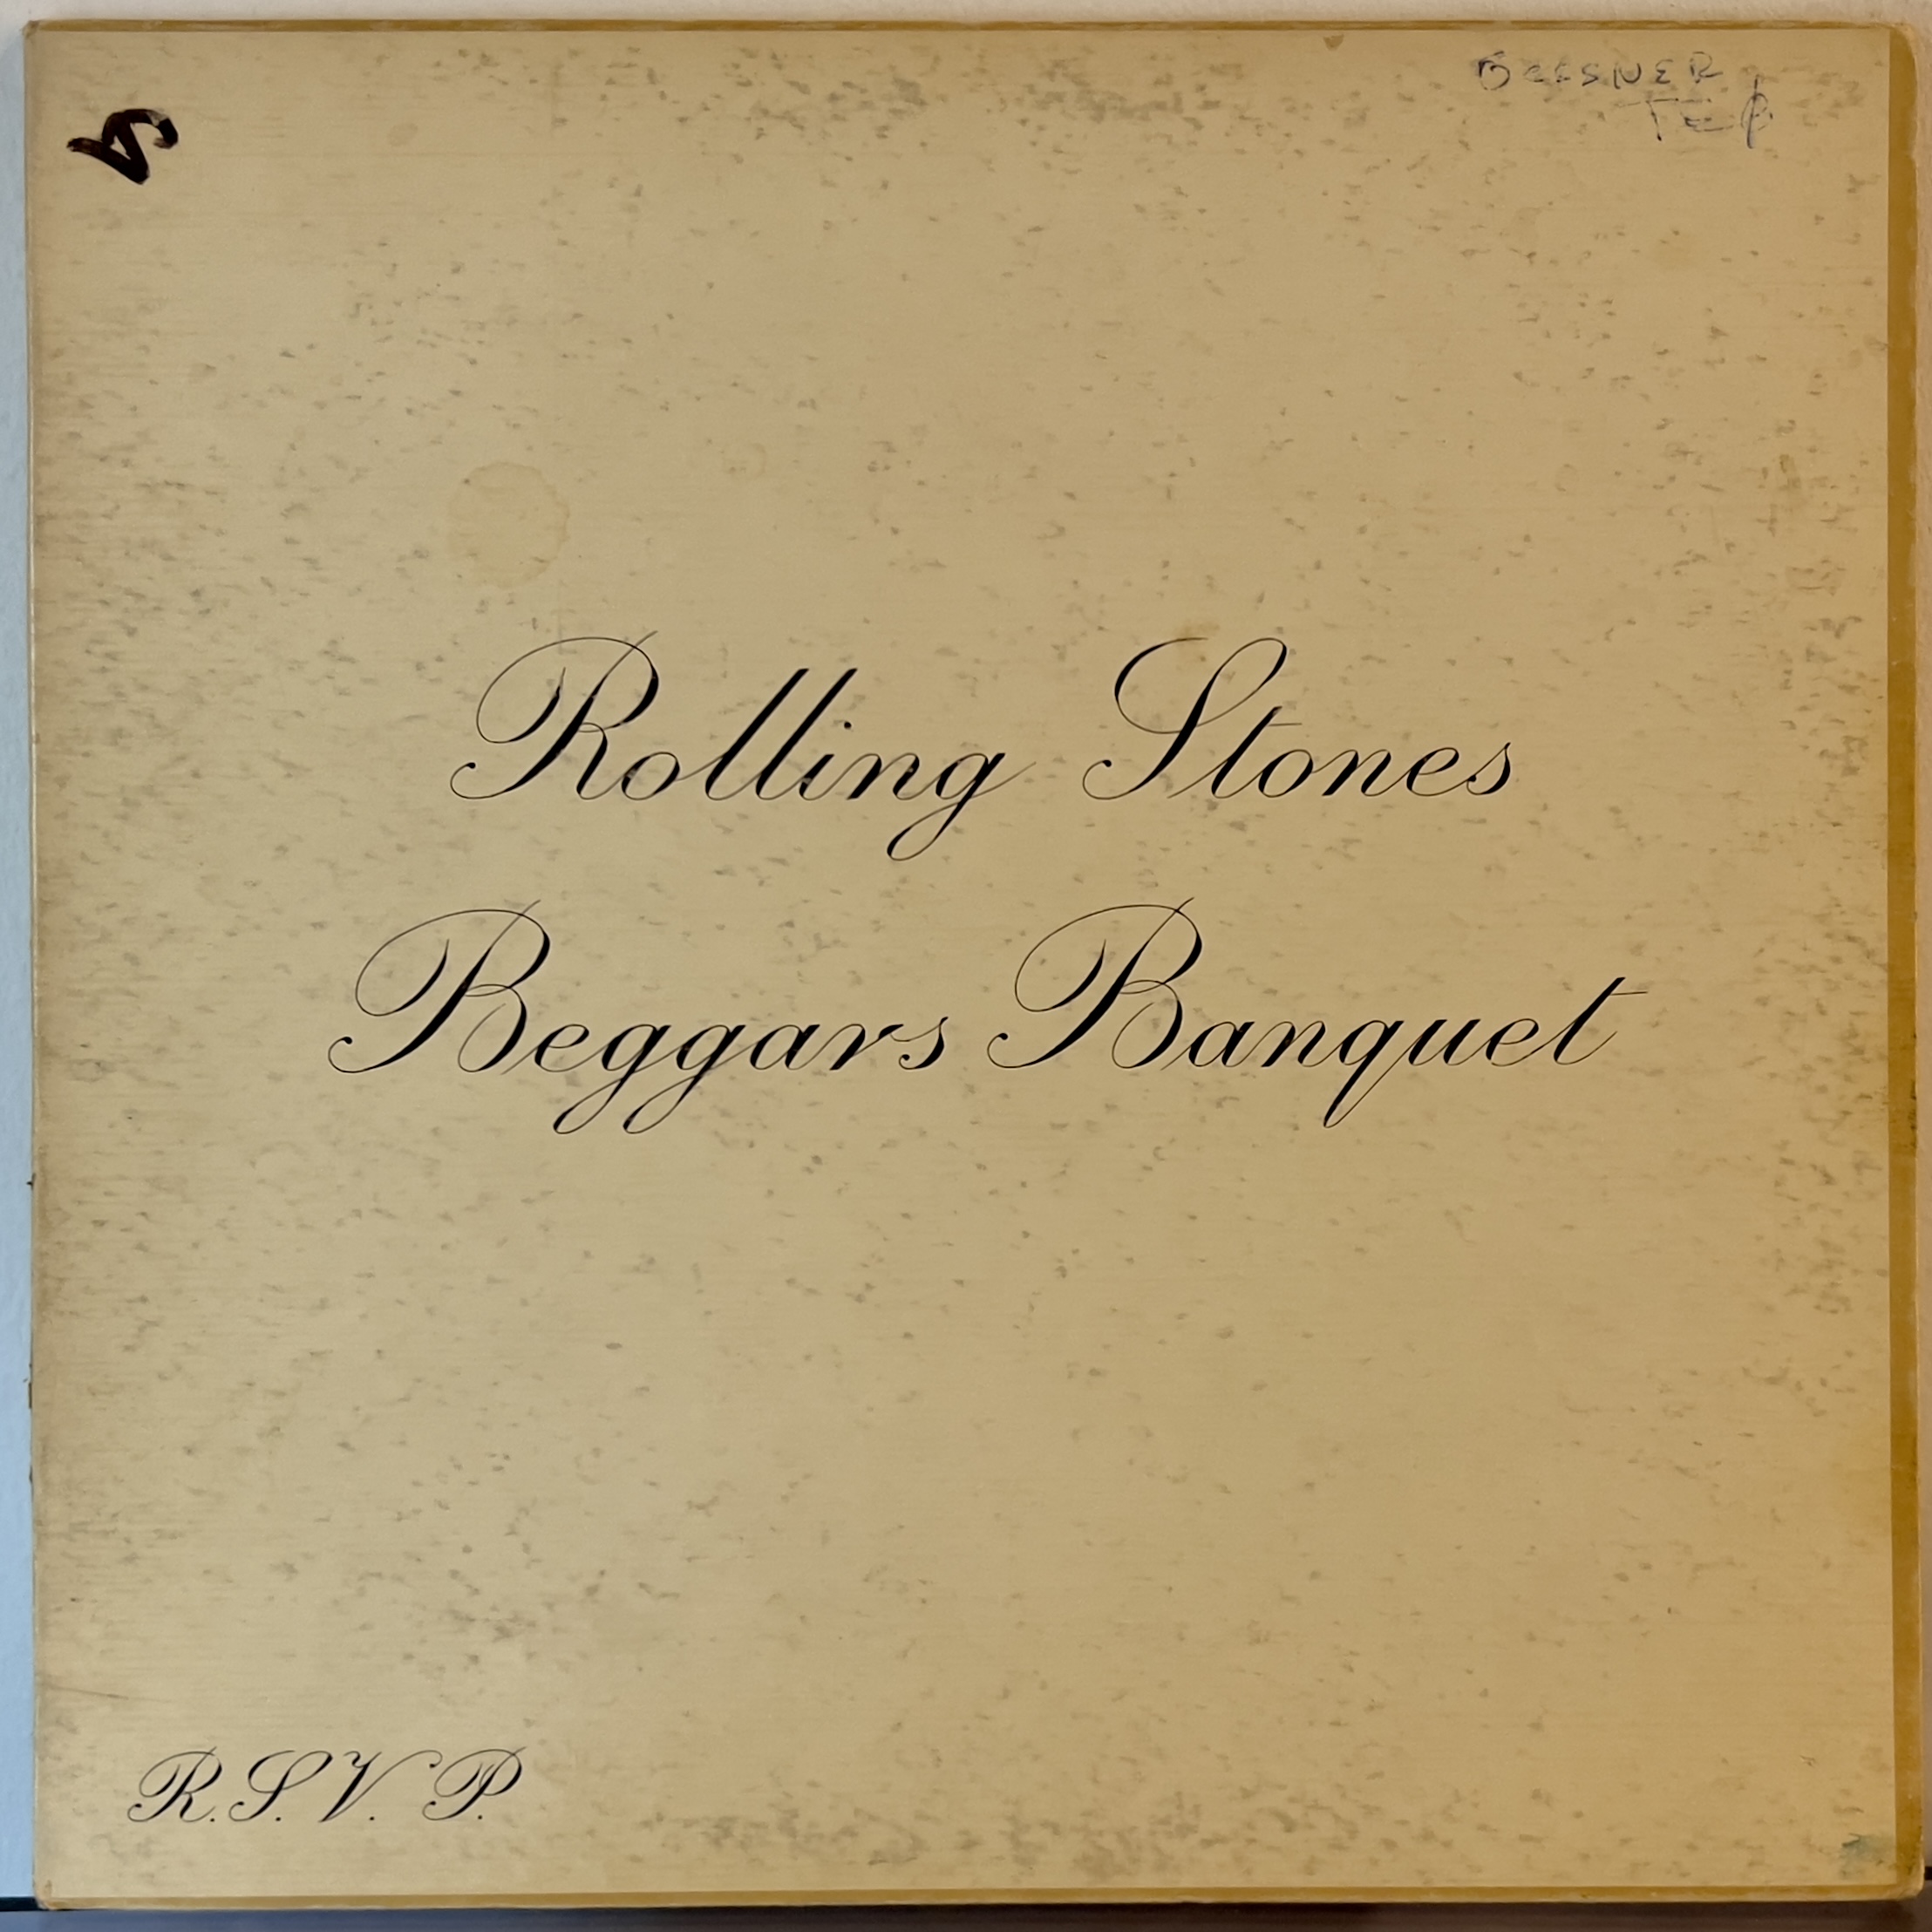 Beggars Banquet by the Rolling Stones